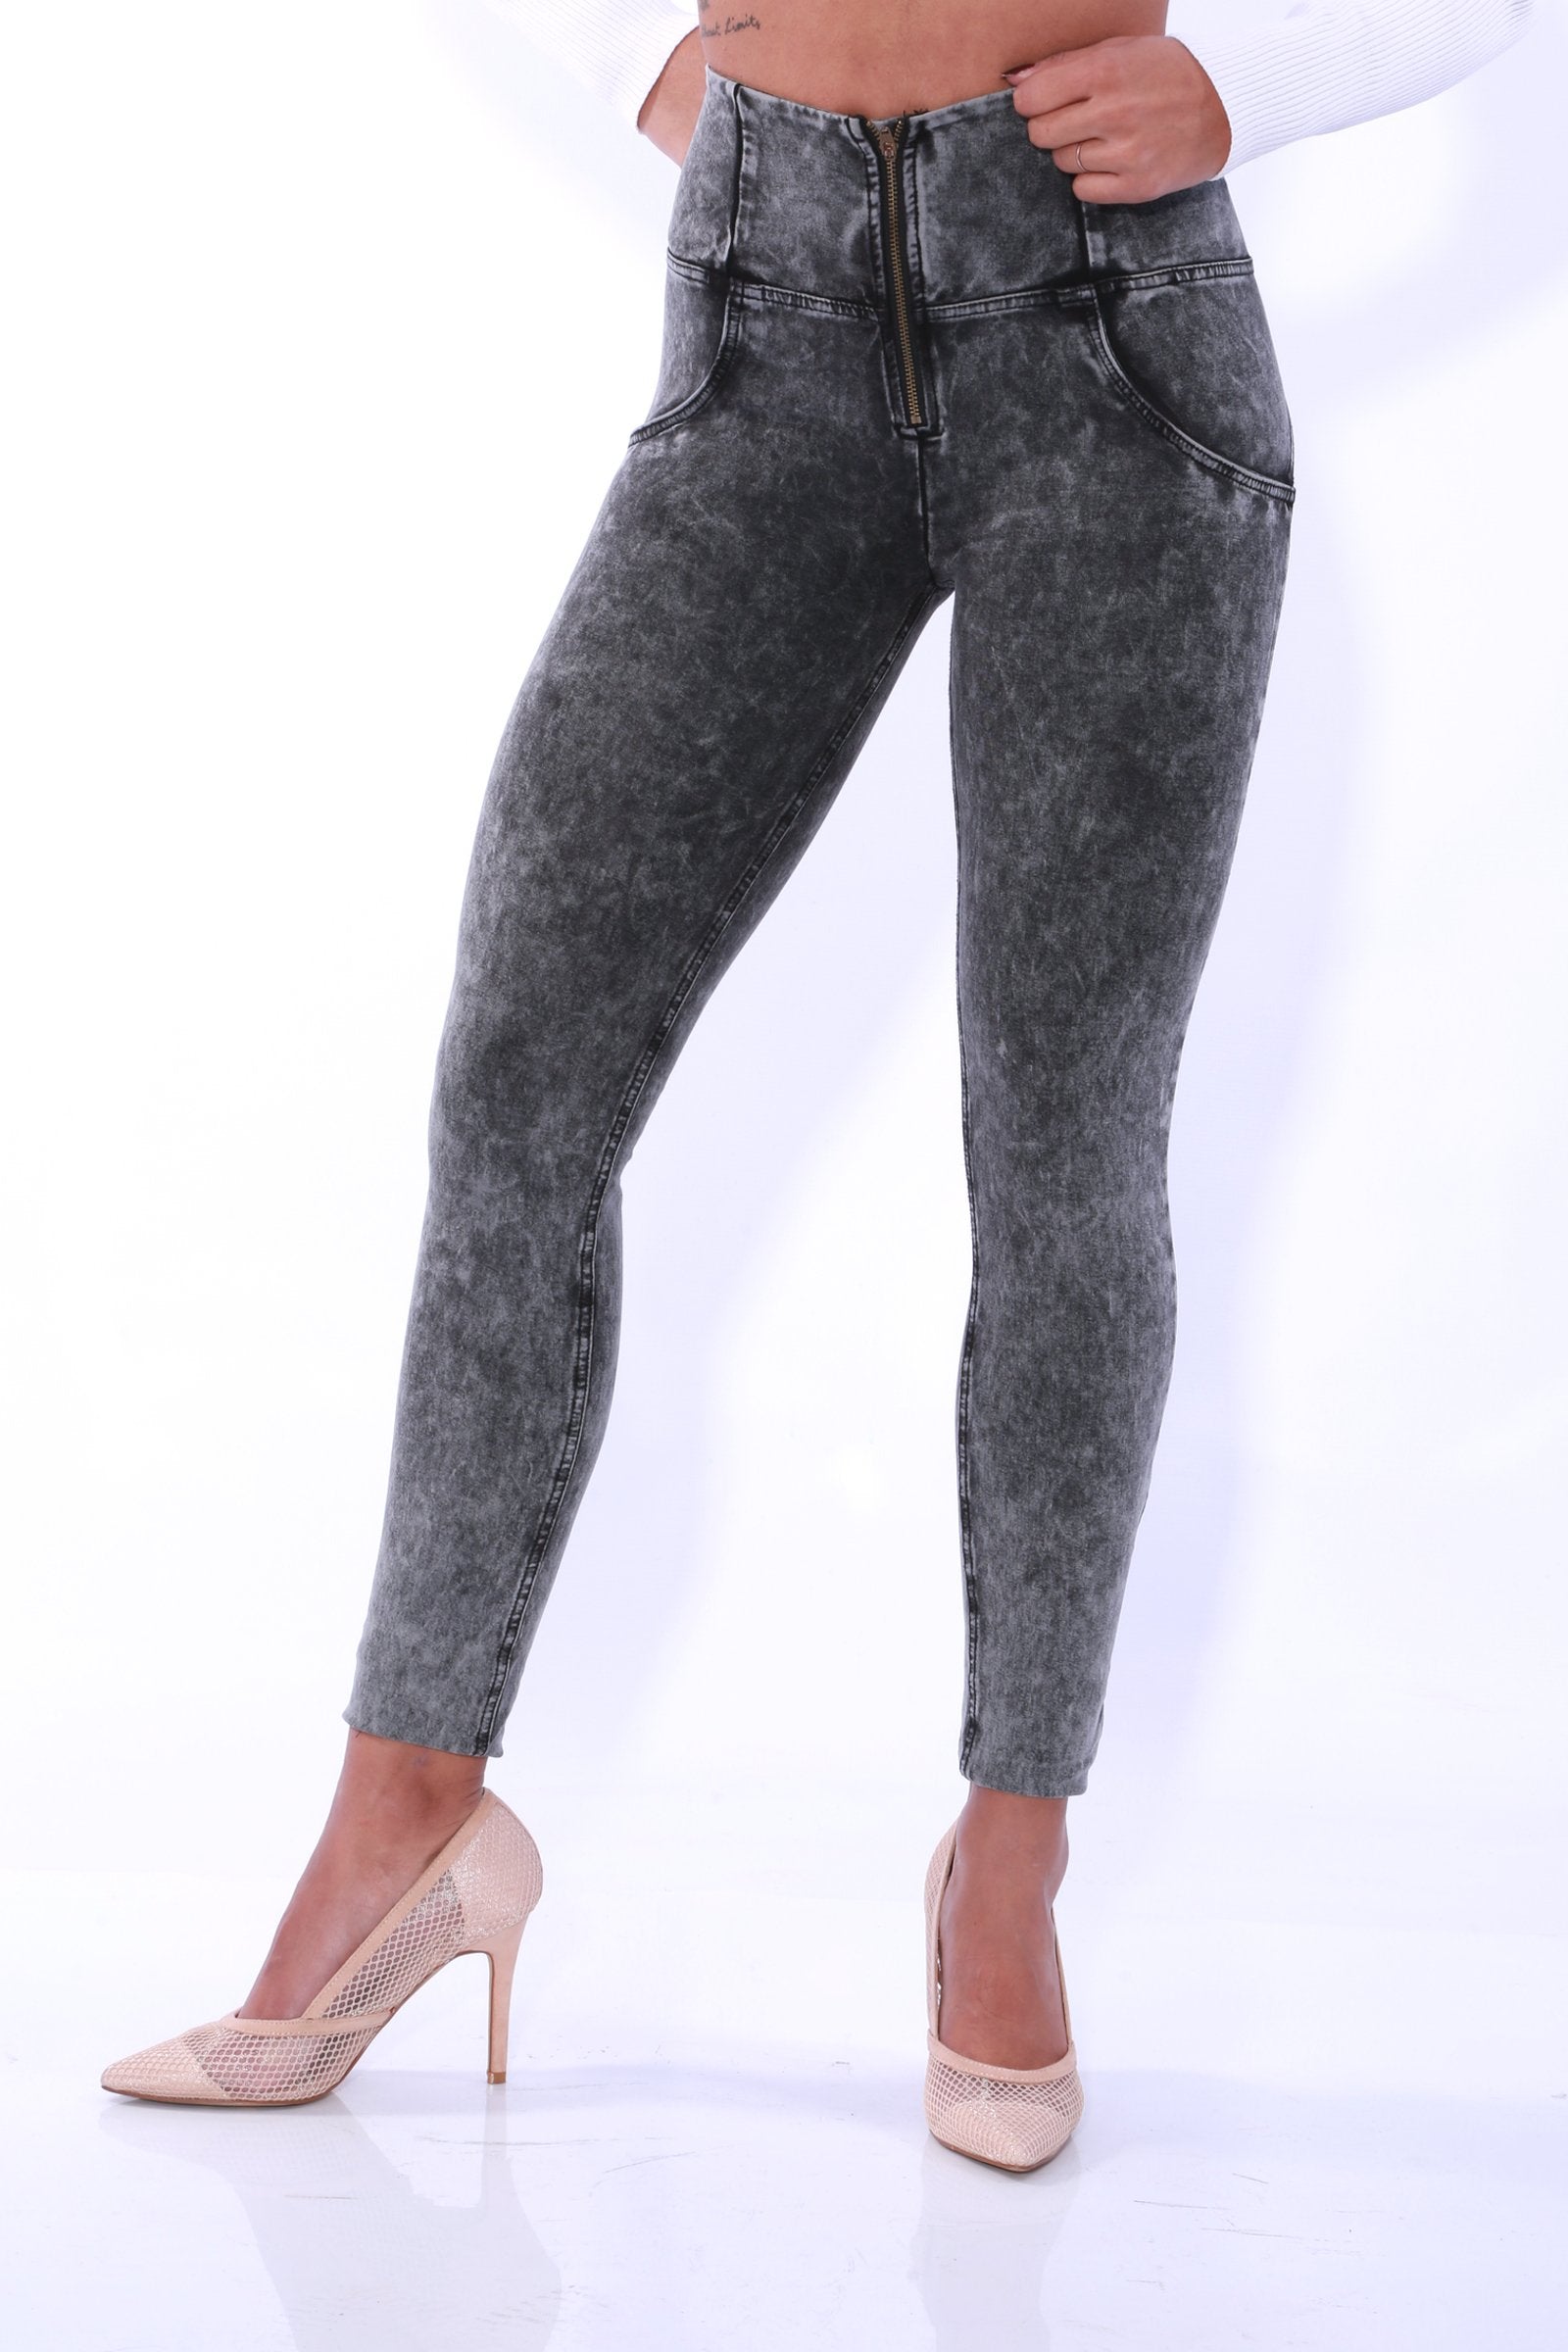 High waist Butt lifting Shaping jeans/Jeggings - Black Stone- Shop